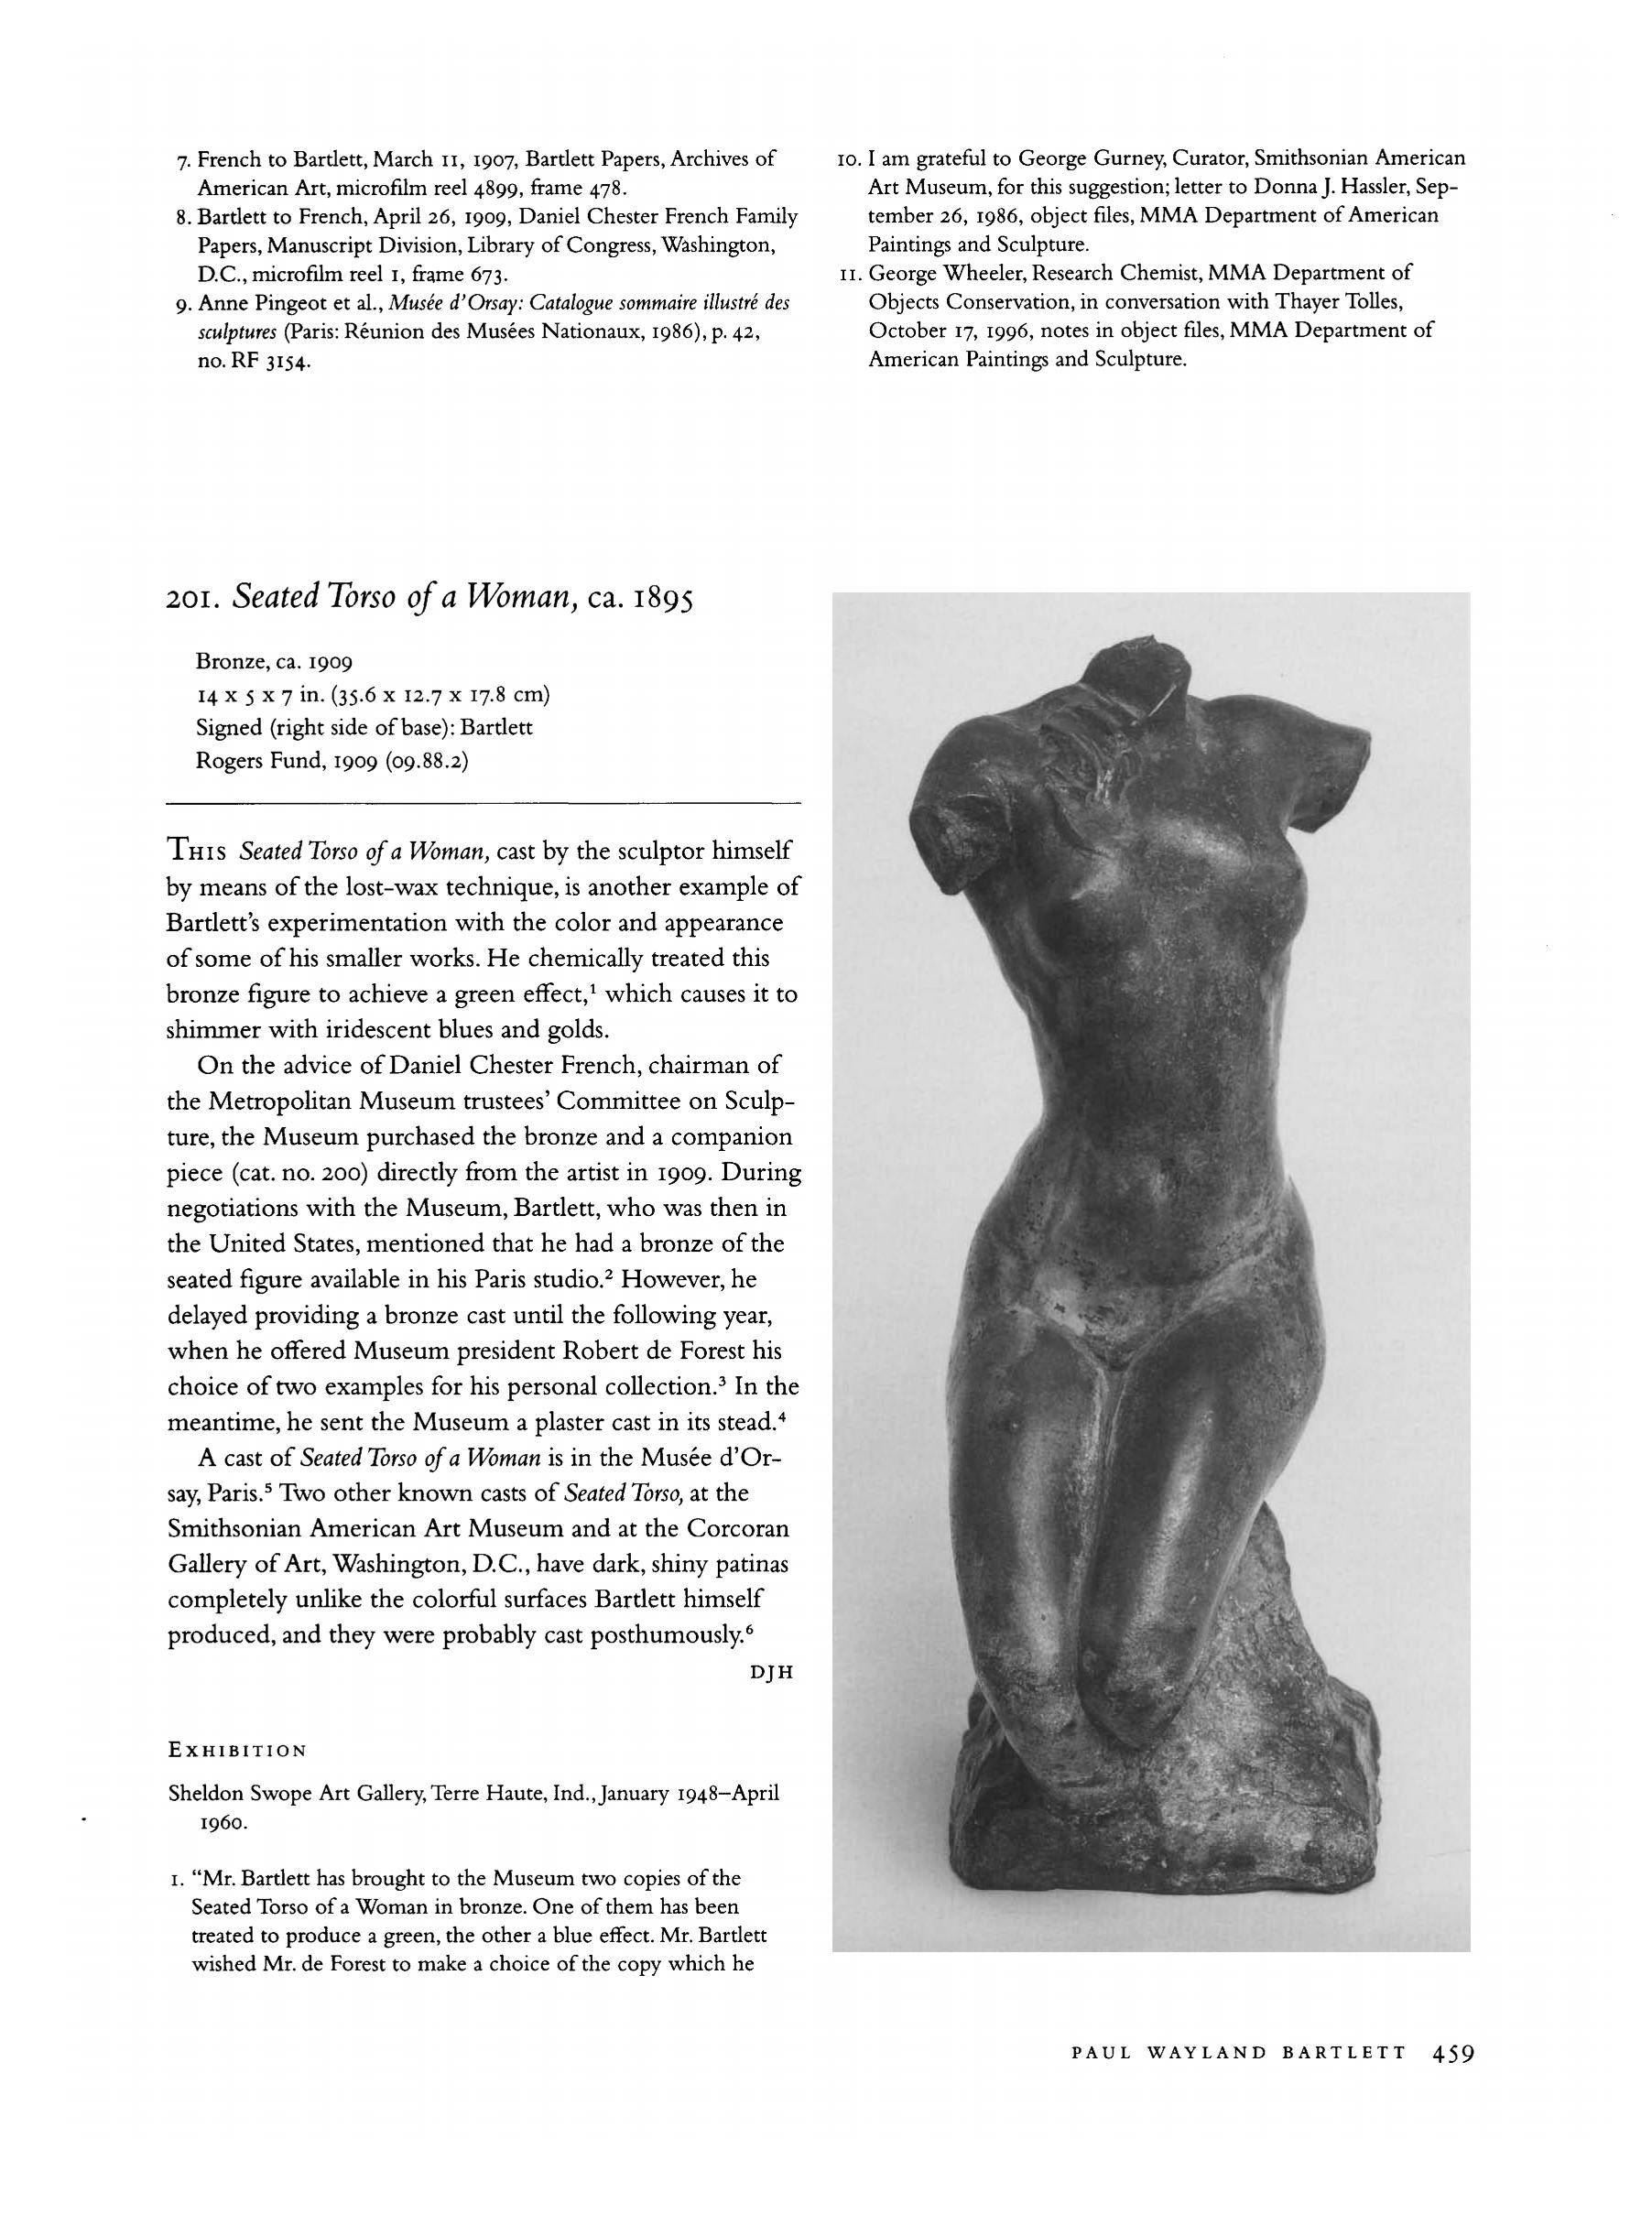 American Sculpture in The Metropolitan Museum of Art : Volume II. A Catalogue of Works by Artists Born between 1865 and 1885 / Edited by Thayer Tolles; Catalogue by Donna J. Hassler, Joan M. Marter, and Thayer Tolles; Photographs by Jerry L. Thompson. — New York : The Metropolitan Museum of Art, 2001